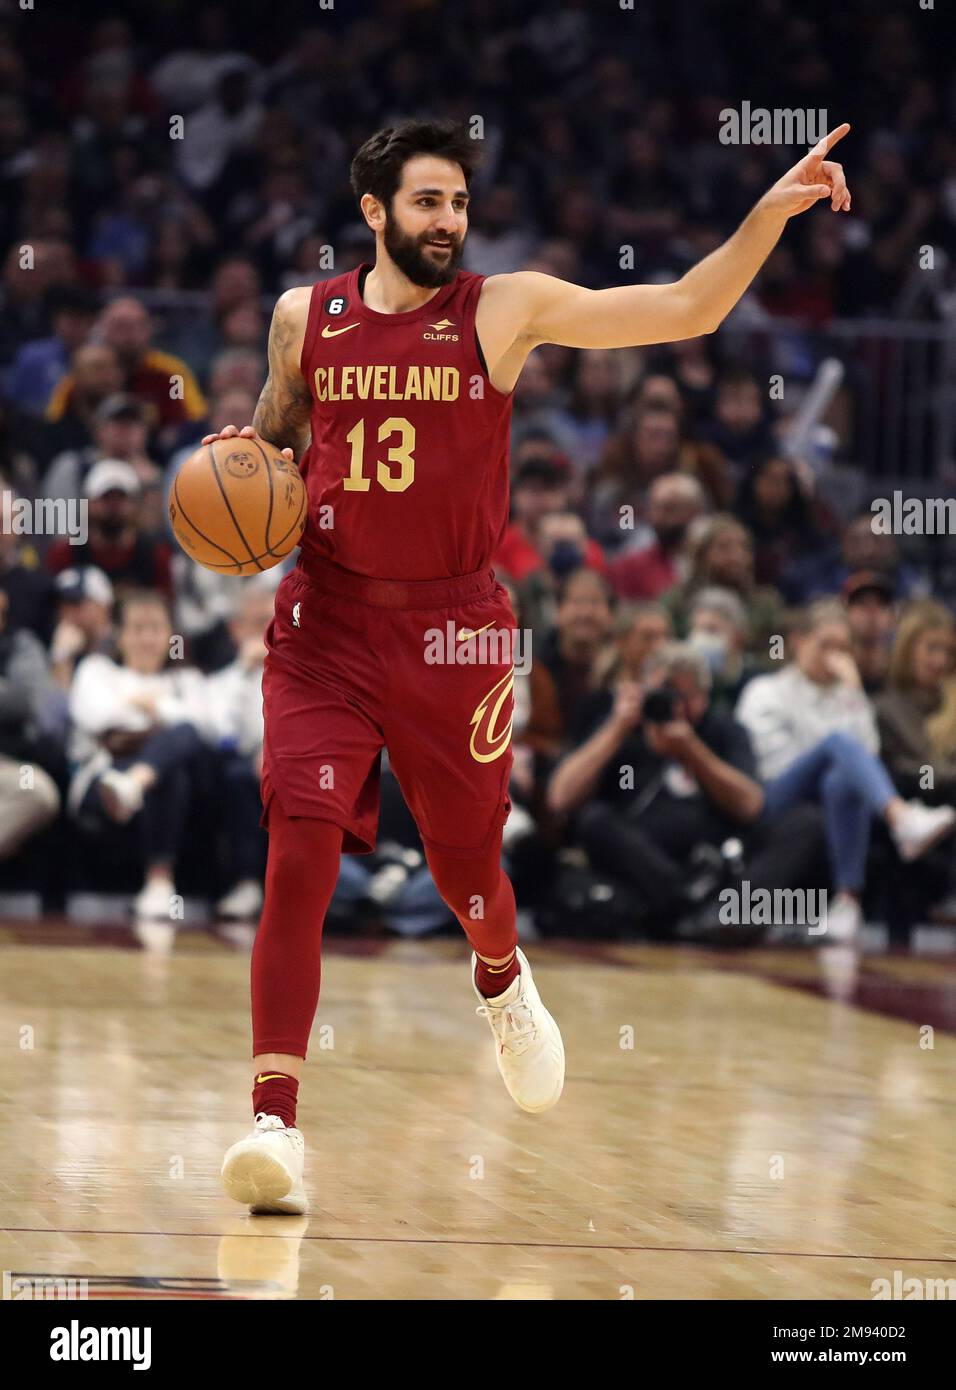 Ricky Rubio could leave Cleveland Cavaliers and opens door to Barcelona